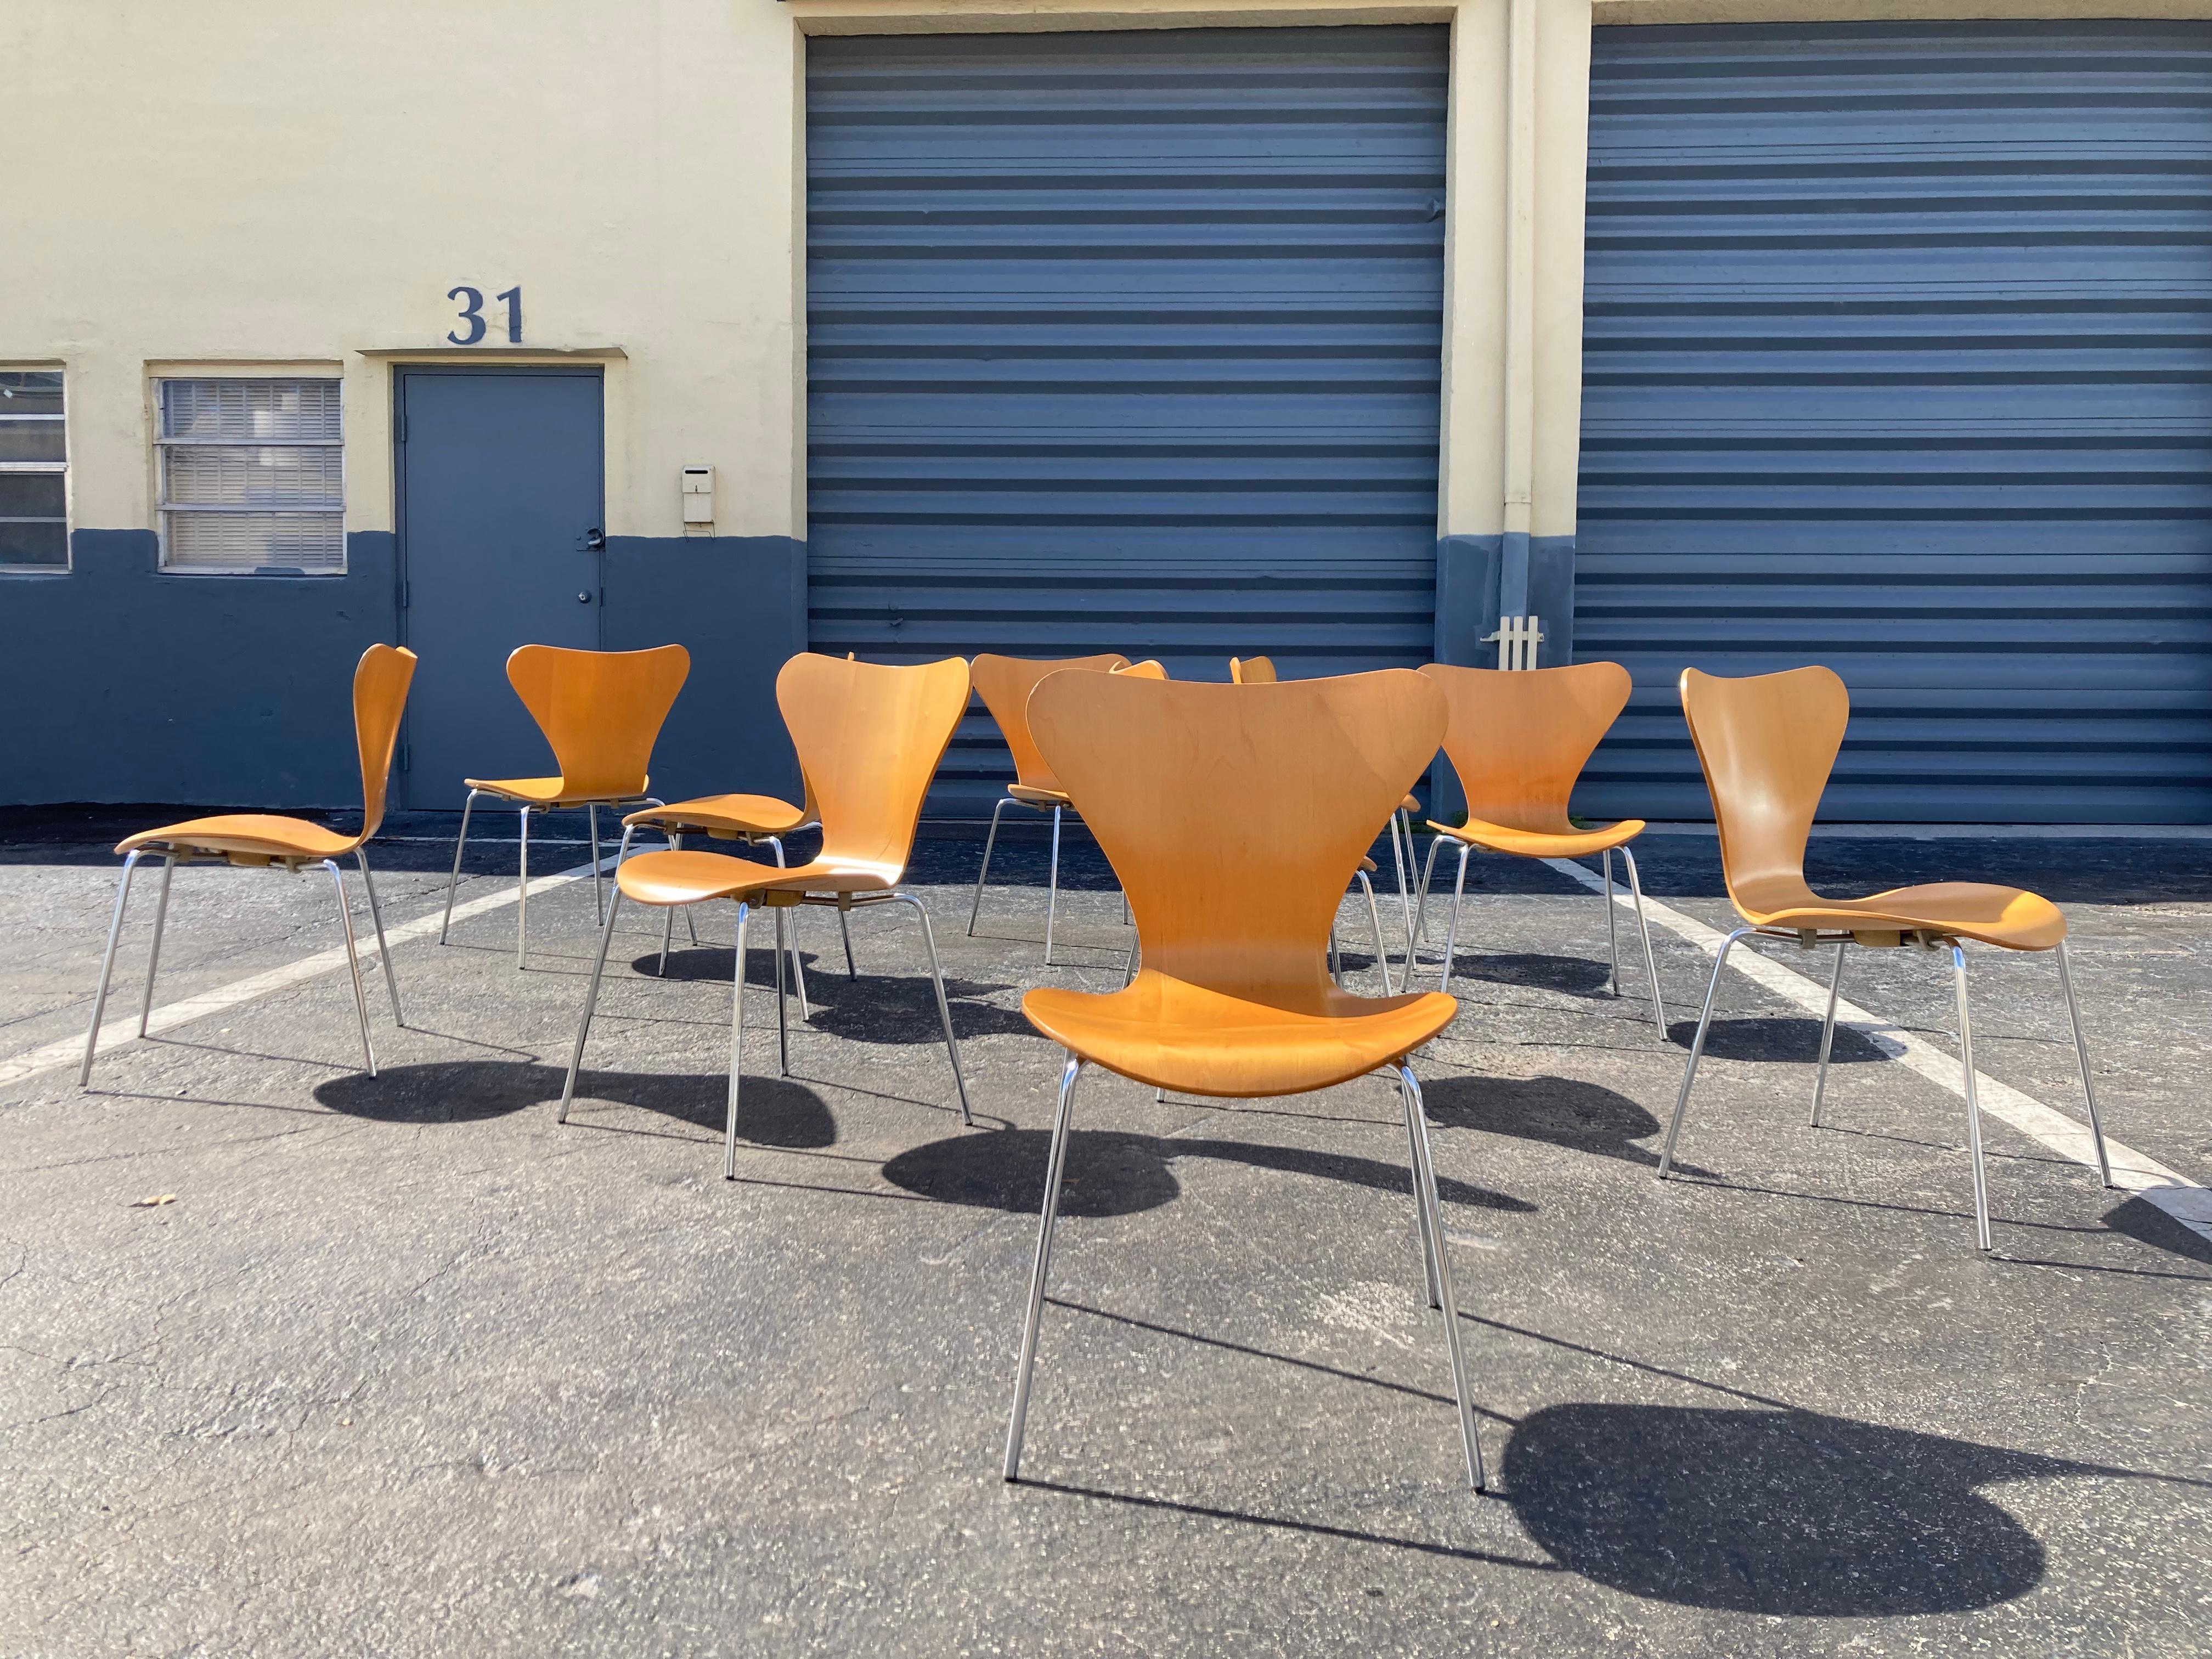 original Arne Jacobsen chairs for Fritz Hansen from 1993, in total ten chairs available.